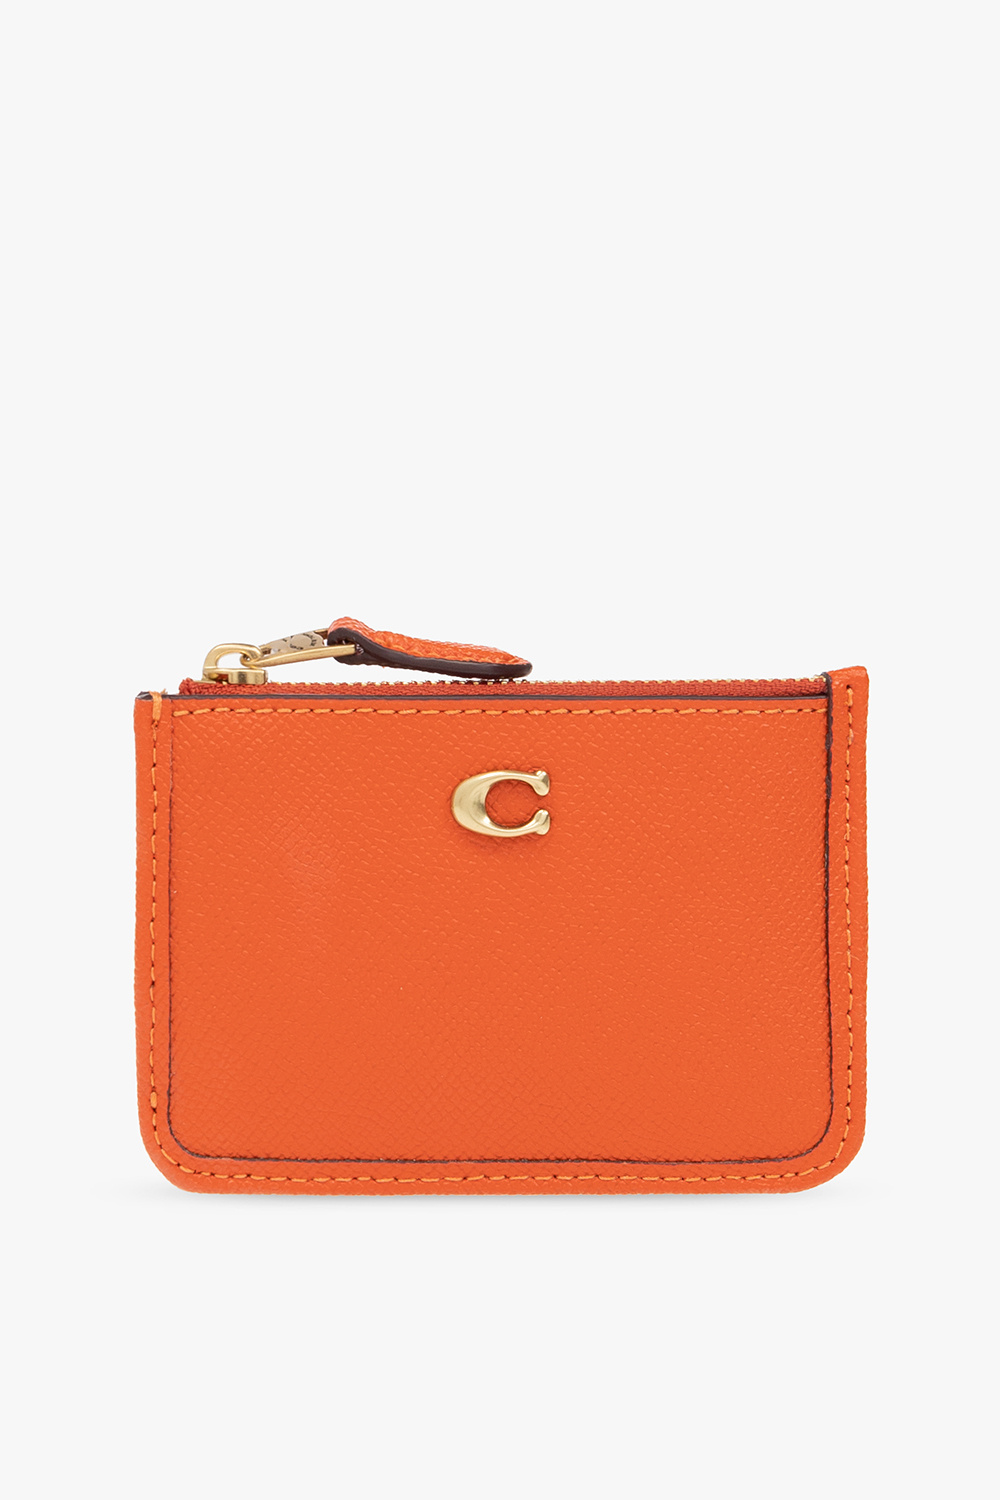 Coach Key holder with logo, Women's Accessories